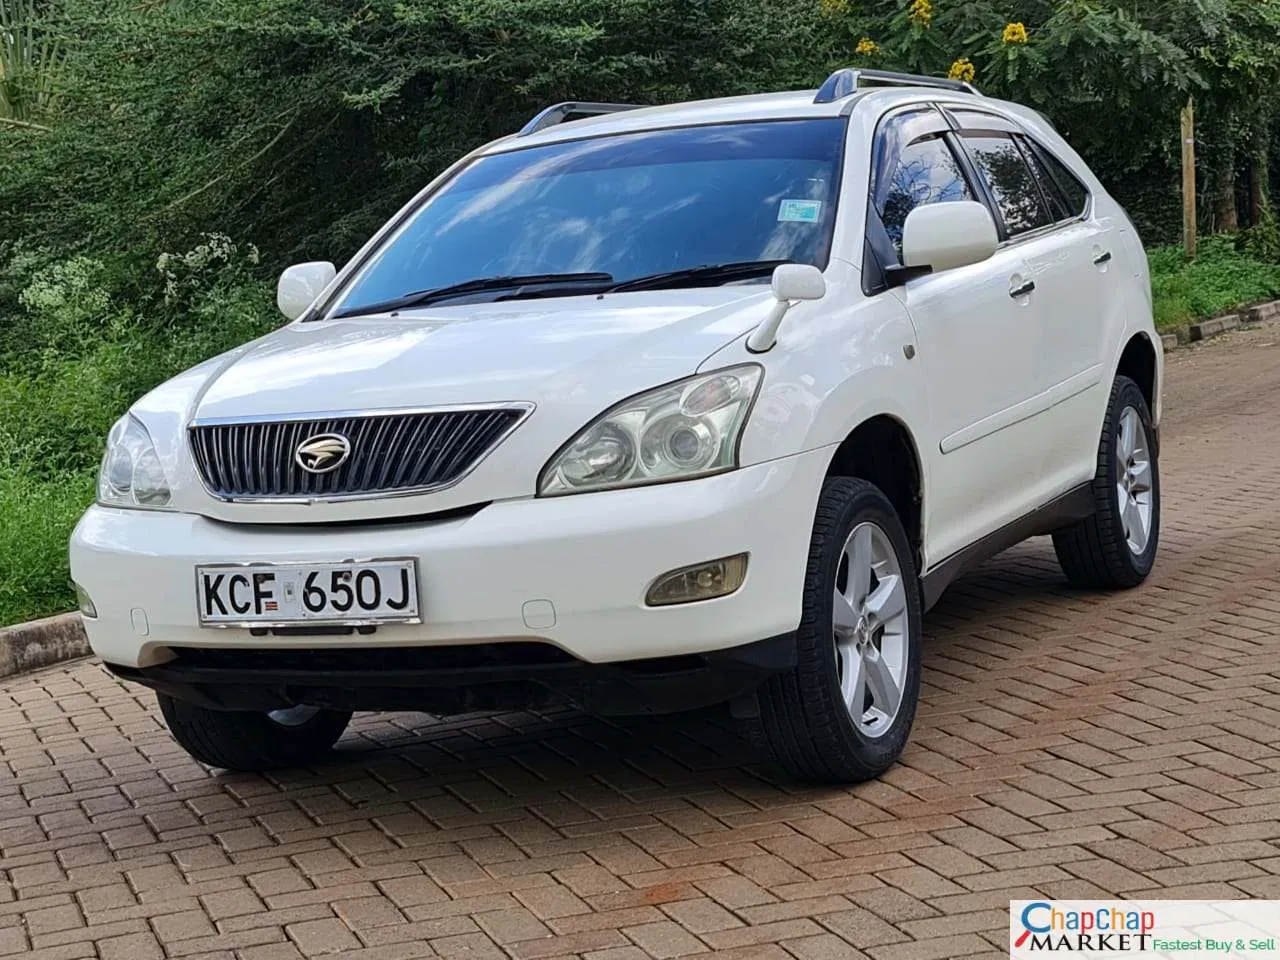 Cars For Sale/Vehicles-Toyota HARRIER QUICKEST SALE🔥 You Pay 40% Deposit Trade in OK EXCLUSIVE